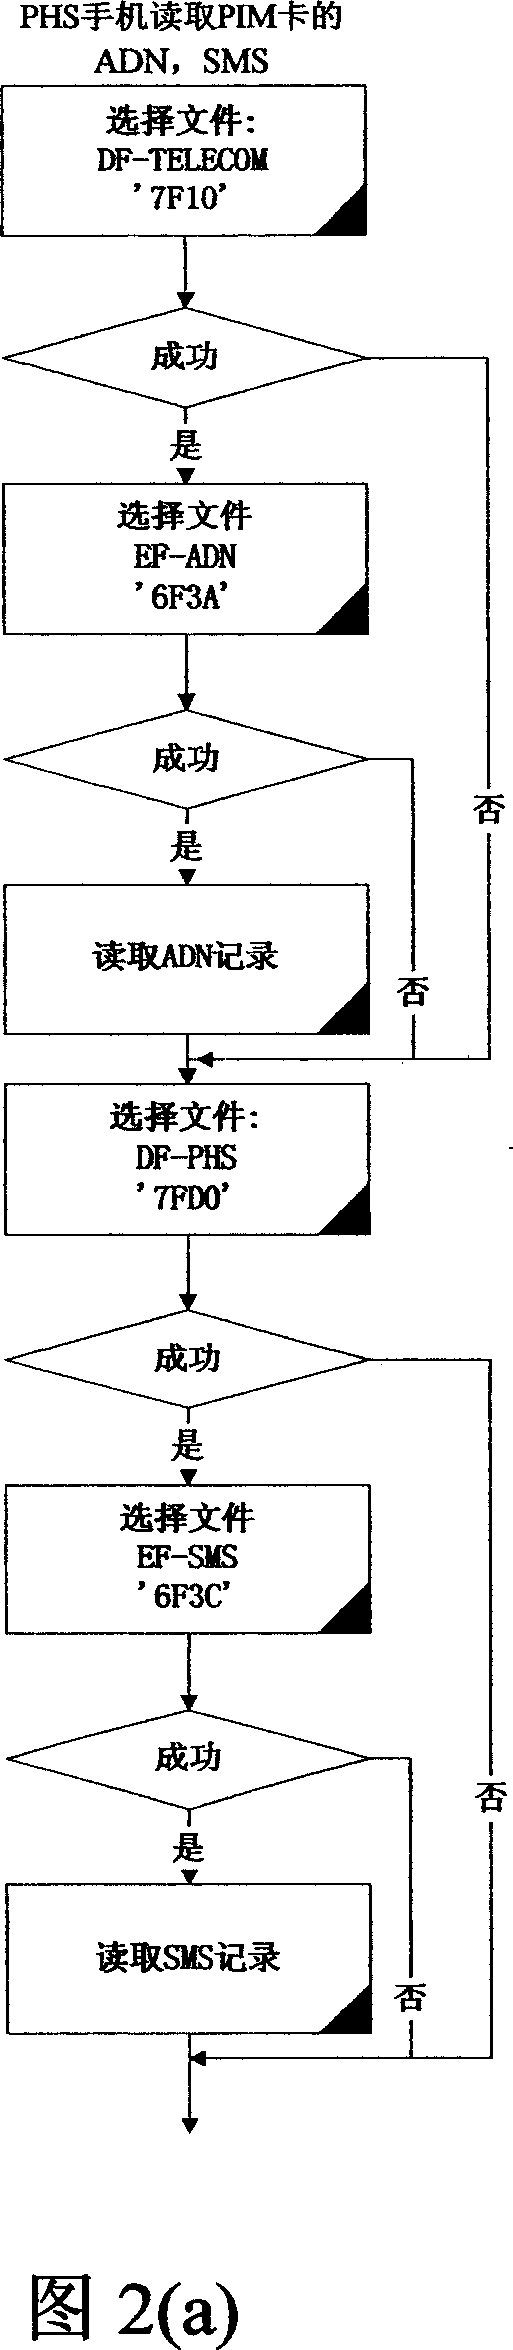 Mobile terminal equipment and method for supporting different kind of smart cards